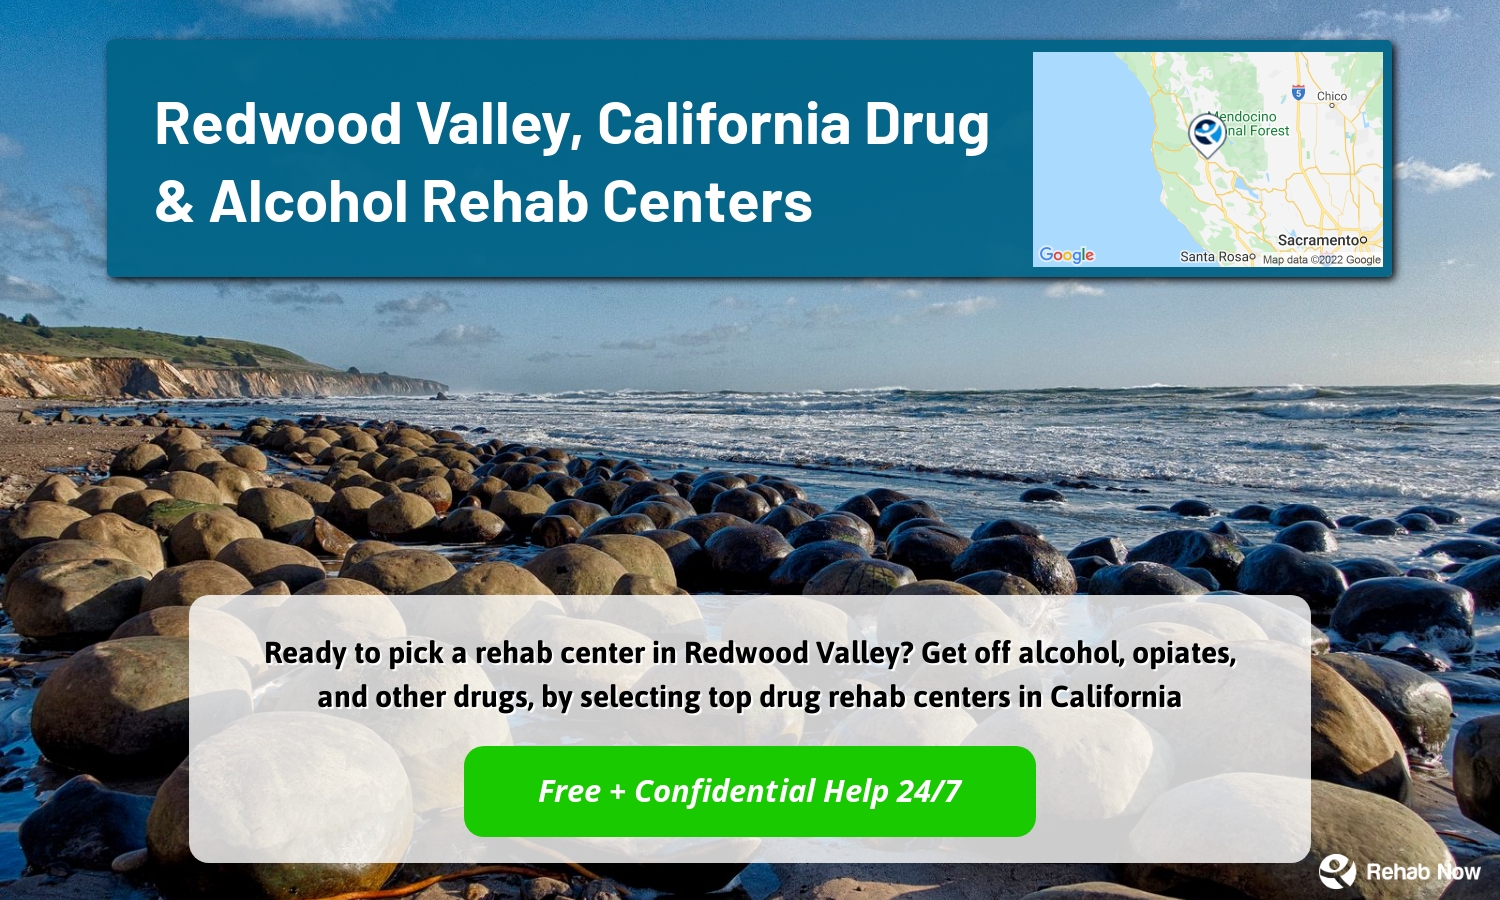 Ready to pick a rehab center in Redwood Valley? Get off alcohol, opiates, and other drugs, by selecting top drug rehab centers in California